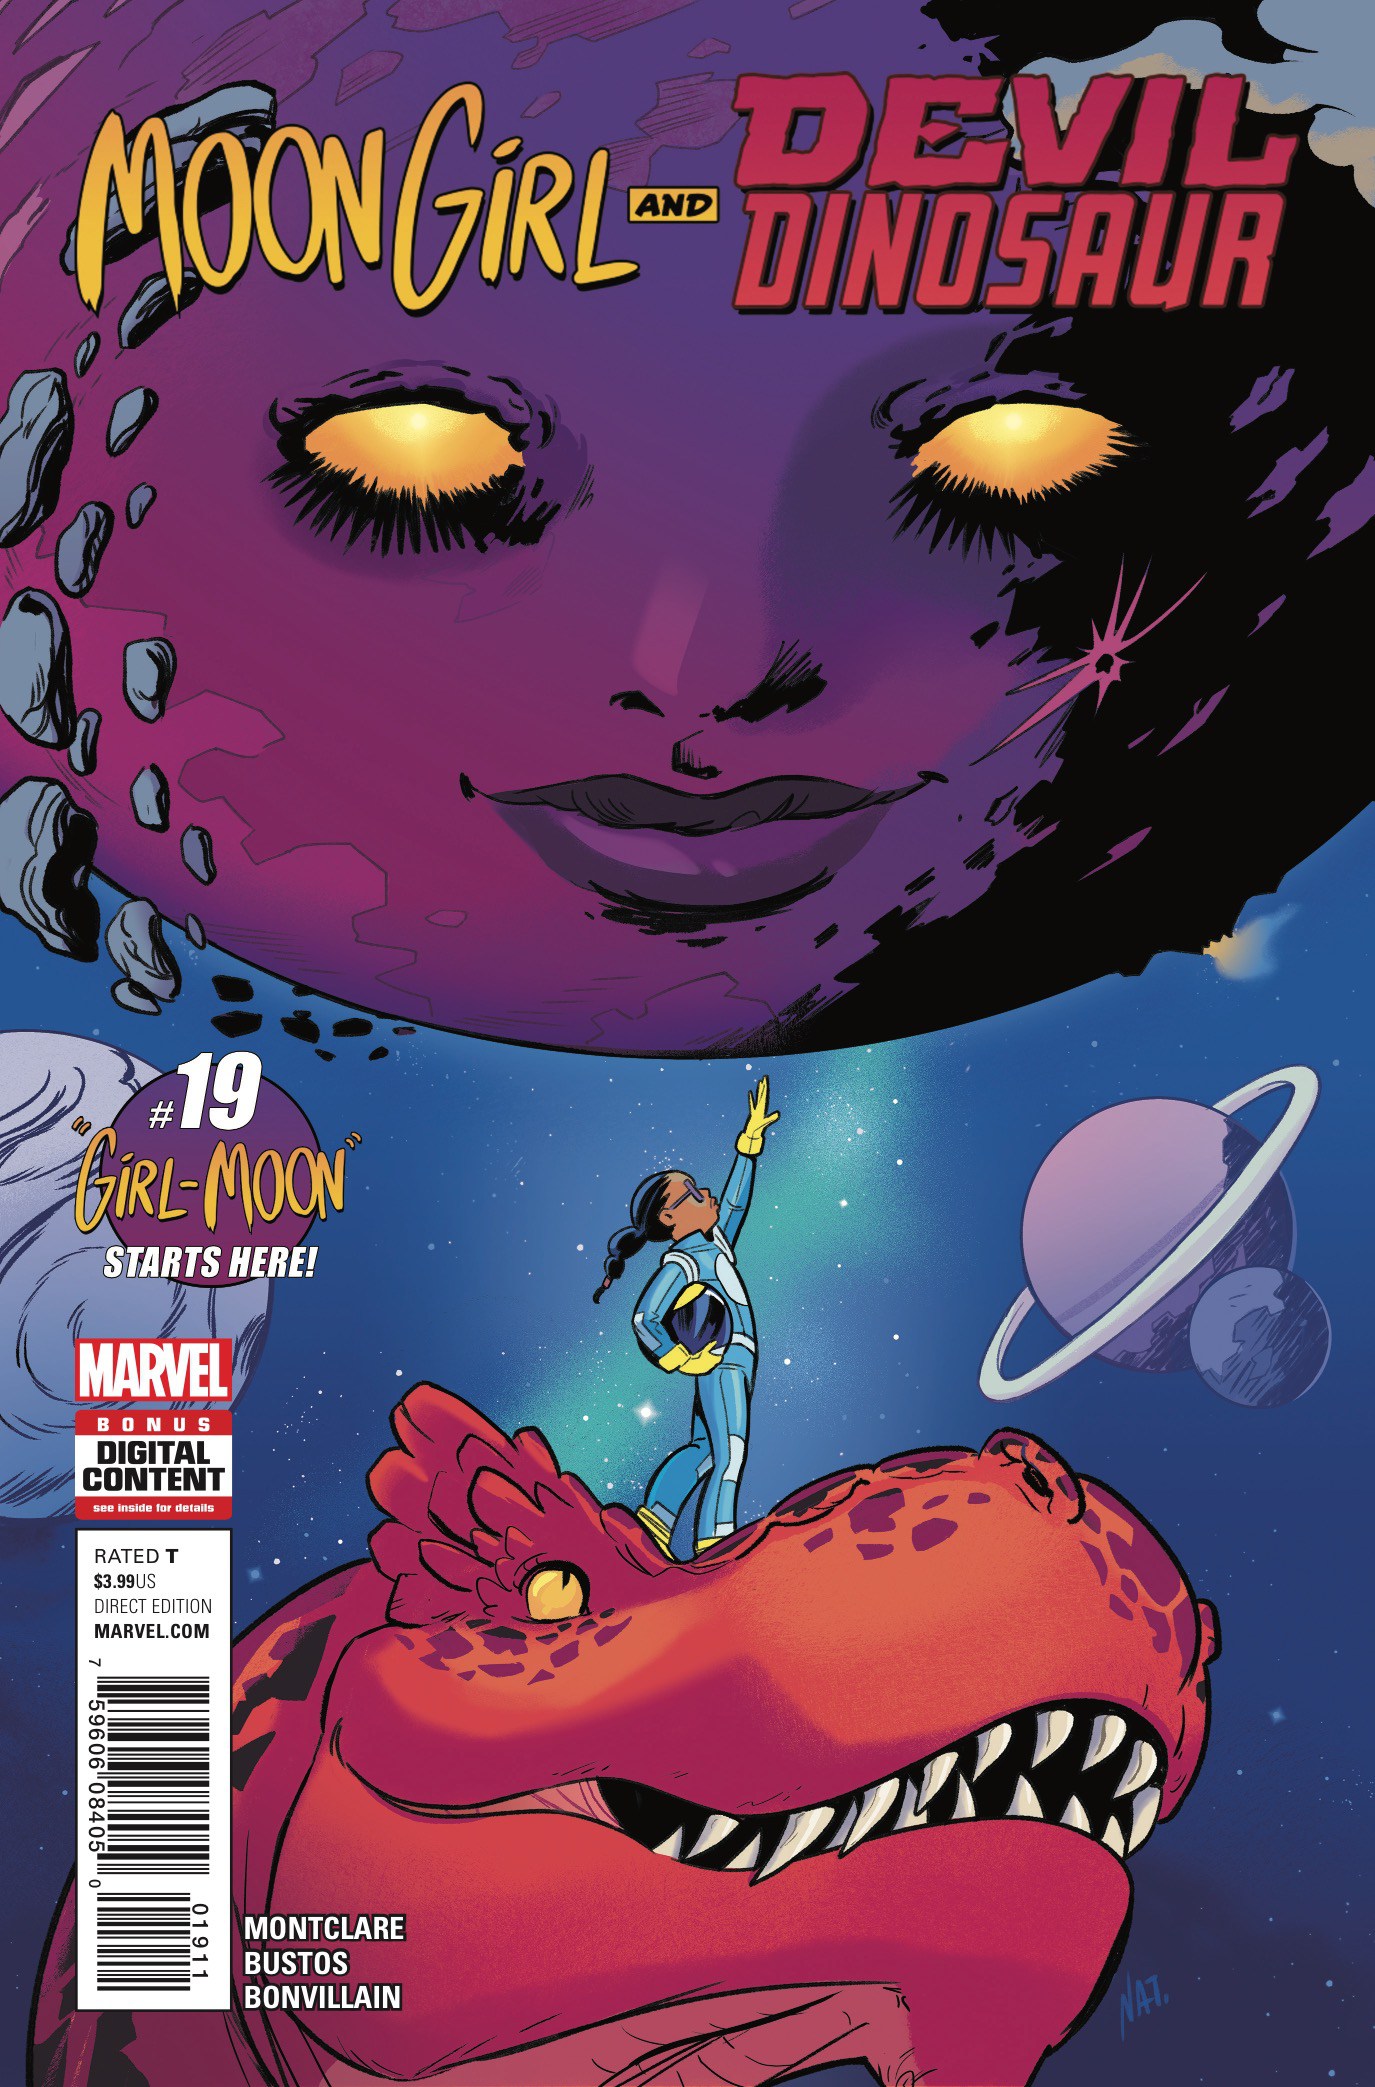 Moon Girl and Devil Dinosaur #19 Review